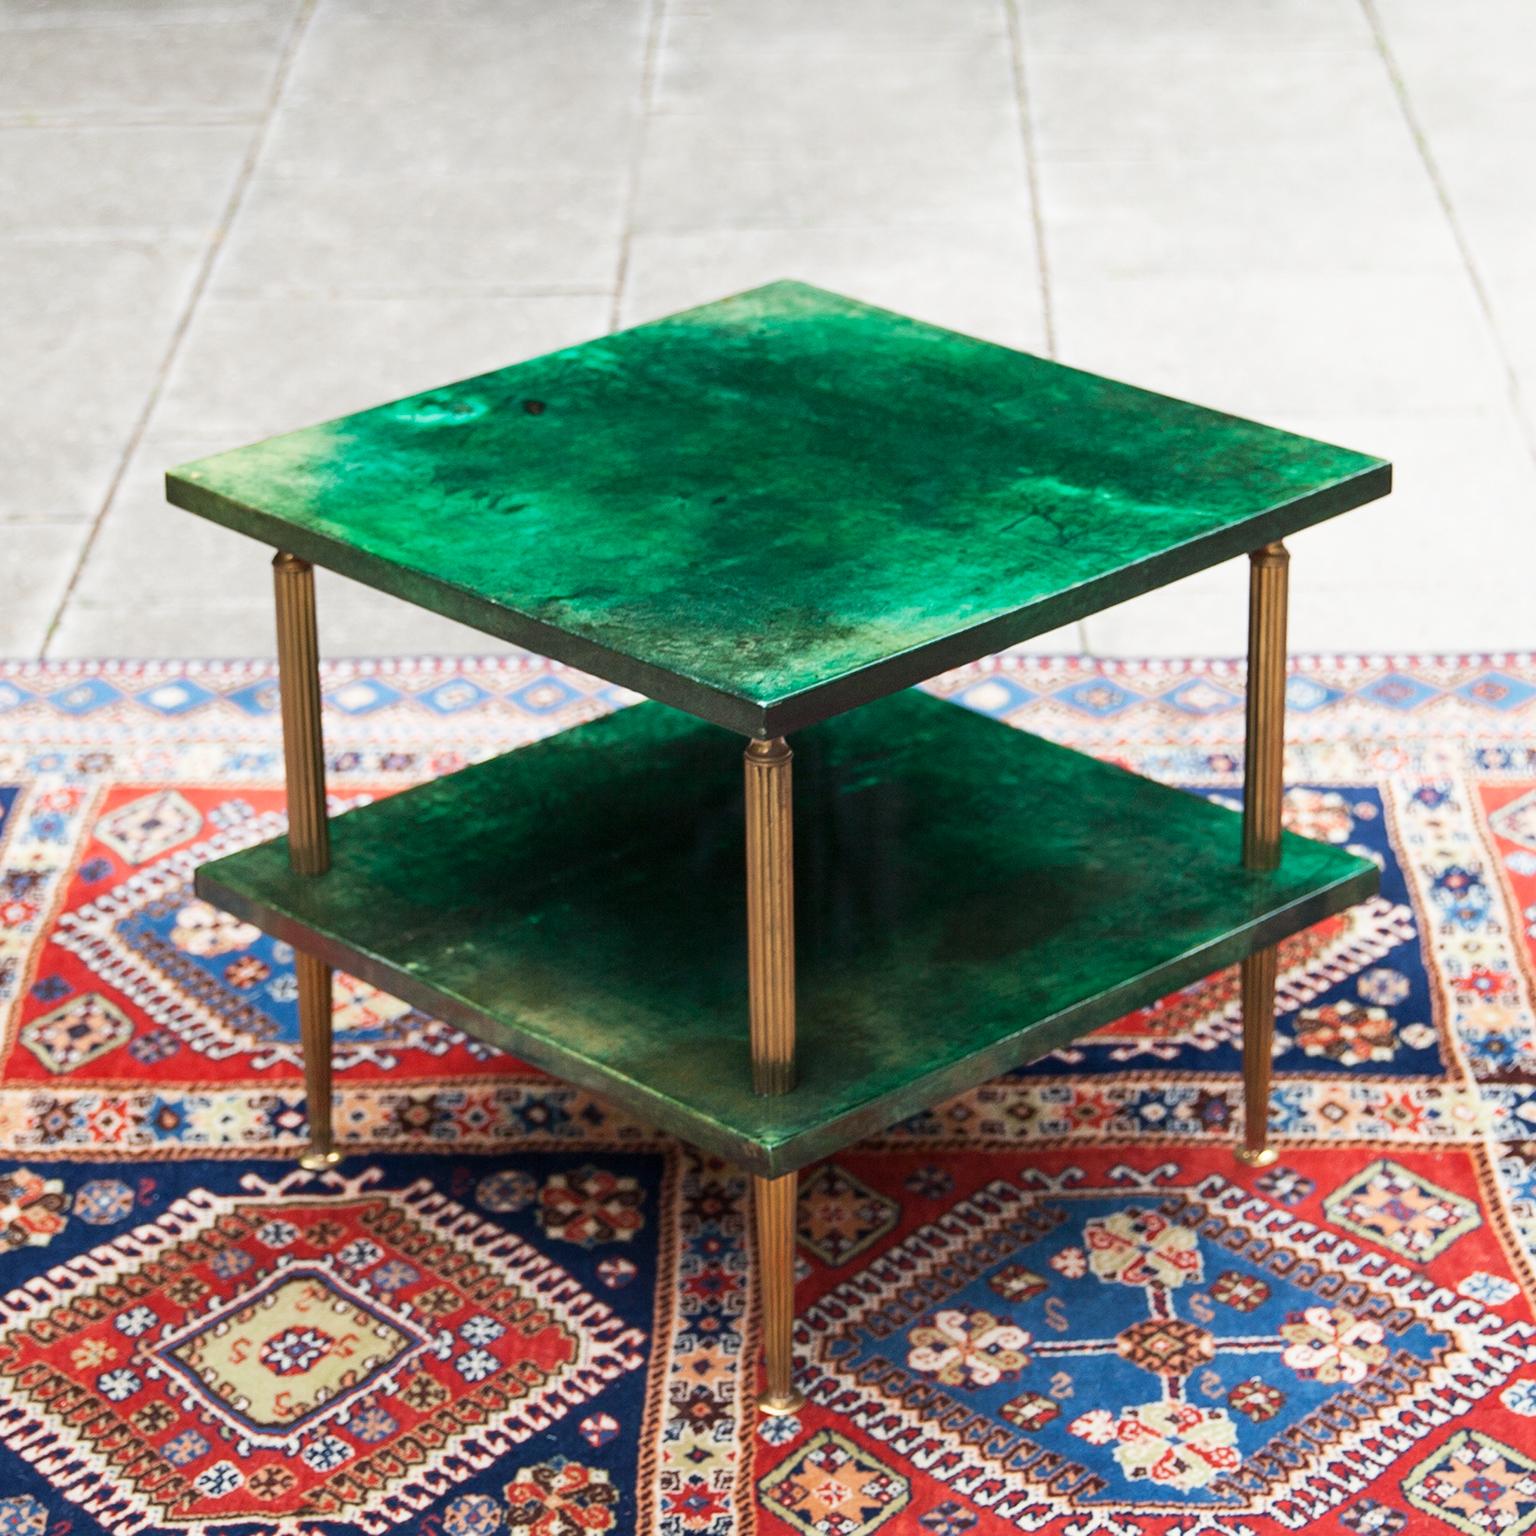 Square side table made by Aldo Tura in green lacquered goatskin and four brass ros executed circa 1970s, in excellent condition.
Along with artists like Piero Fornasetti and Carlo Bugatti, Aldo Tura (1909-1963) definitely belonged to the mavericks